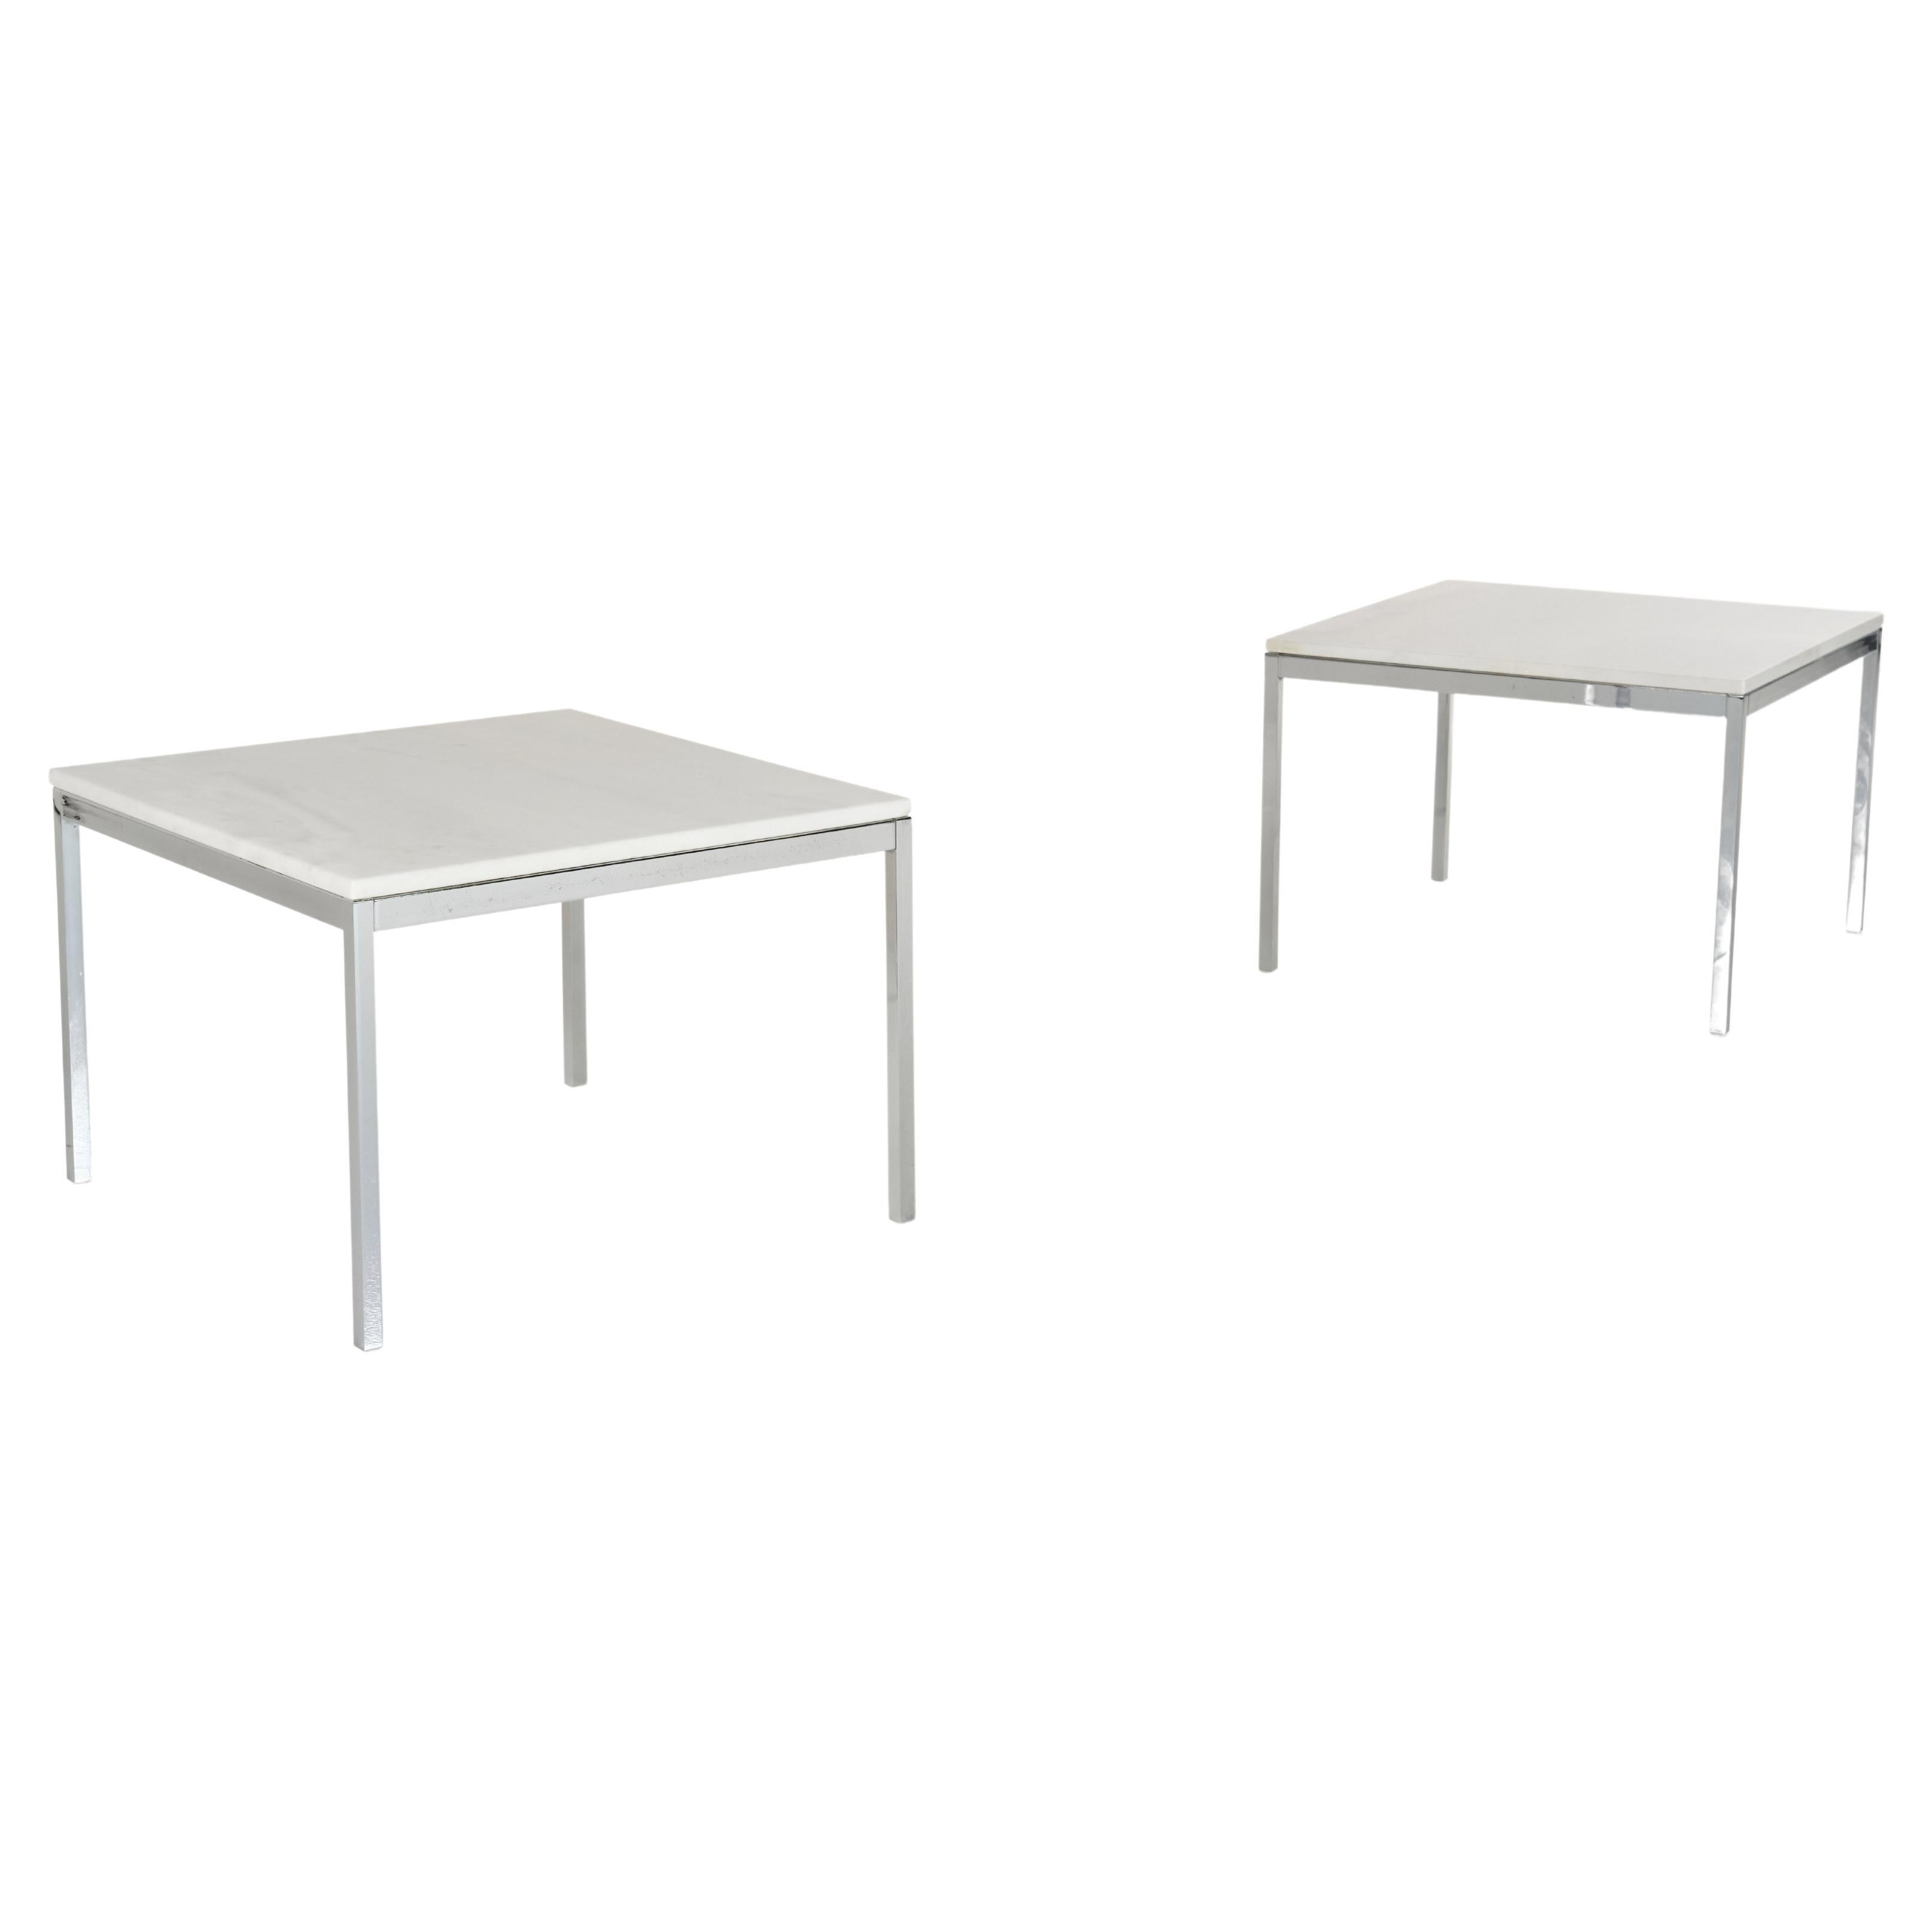 Set of Two Metal and Mar Low Table by Florence Knoll, American Design, 1960s